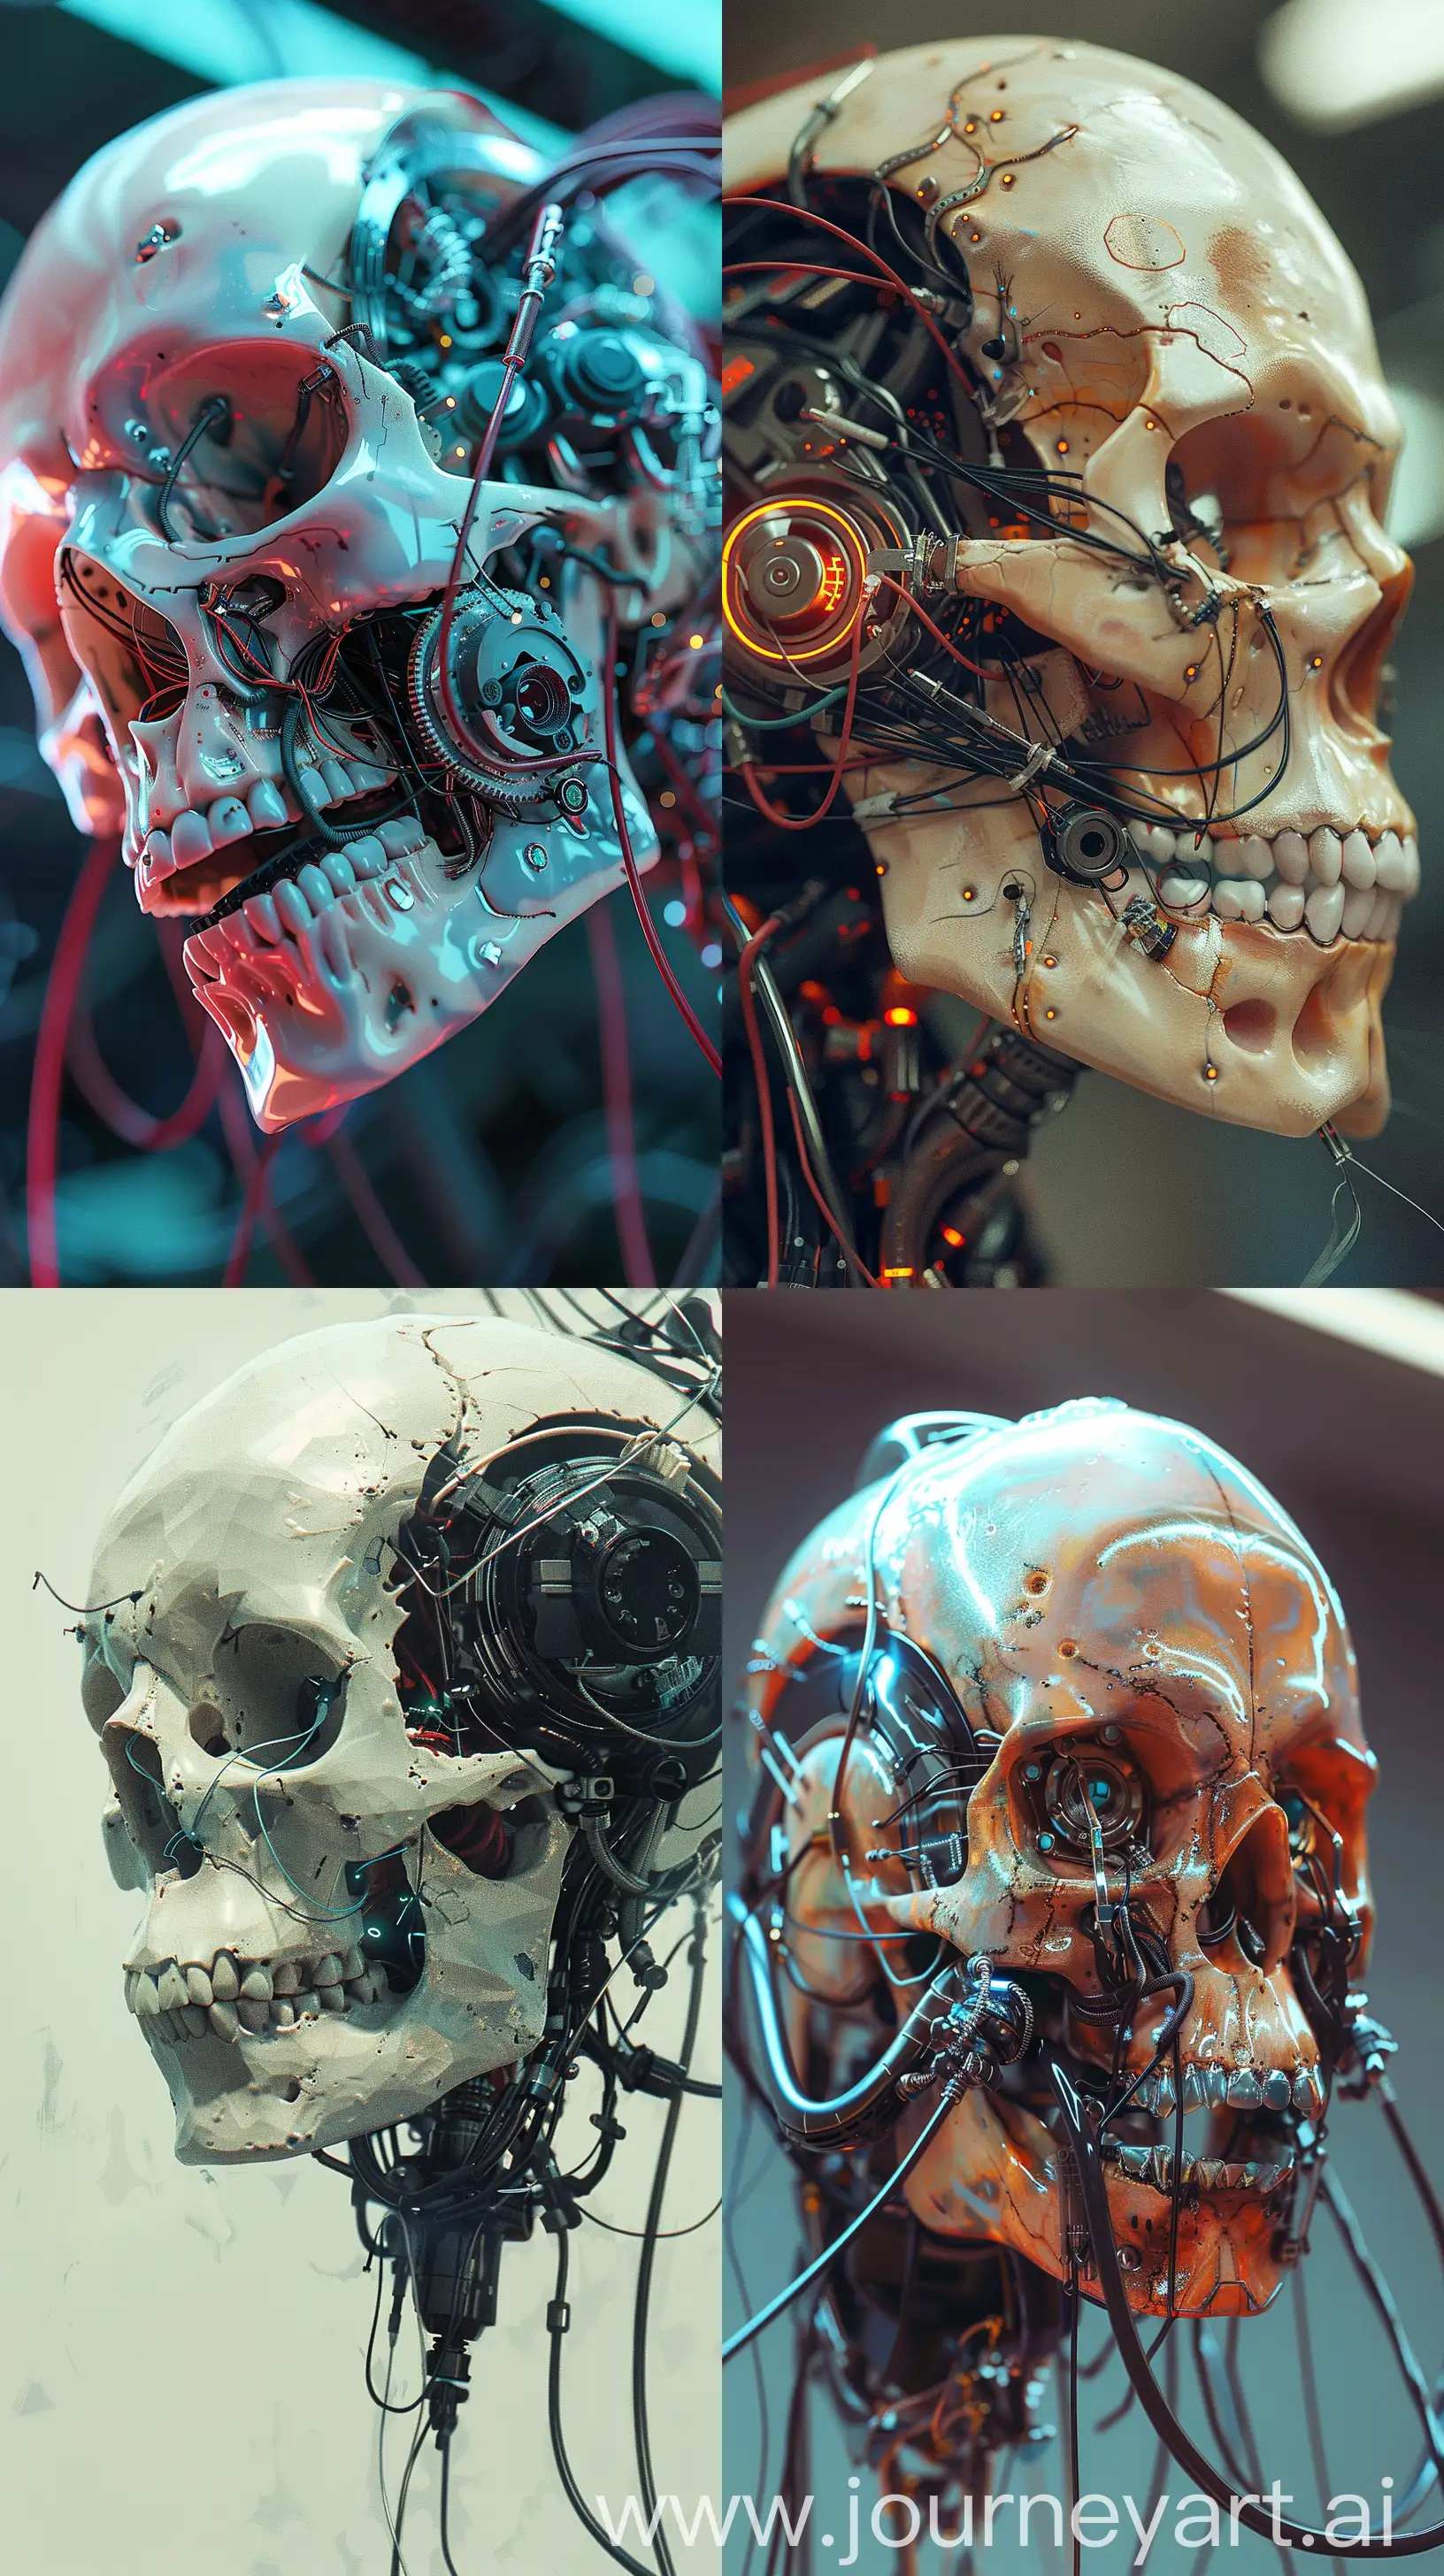 Futuristic-Cyborg-Skull-Connected-to-Digital-Network